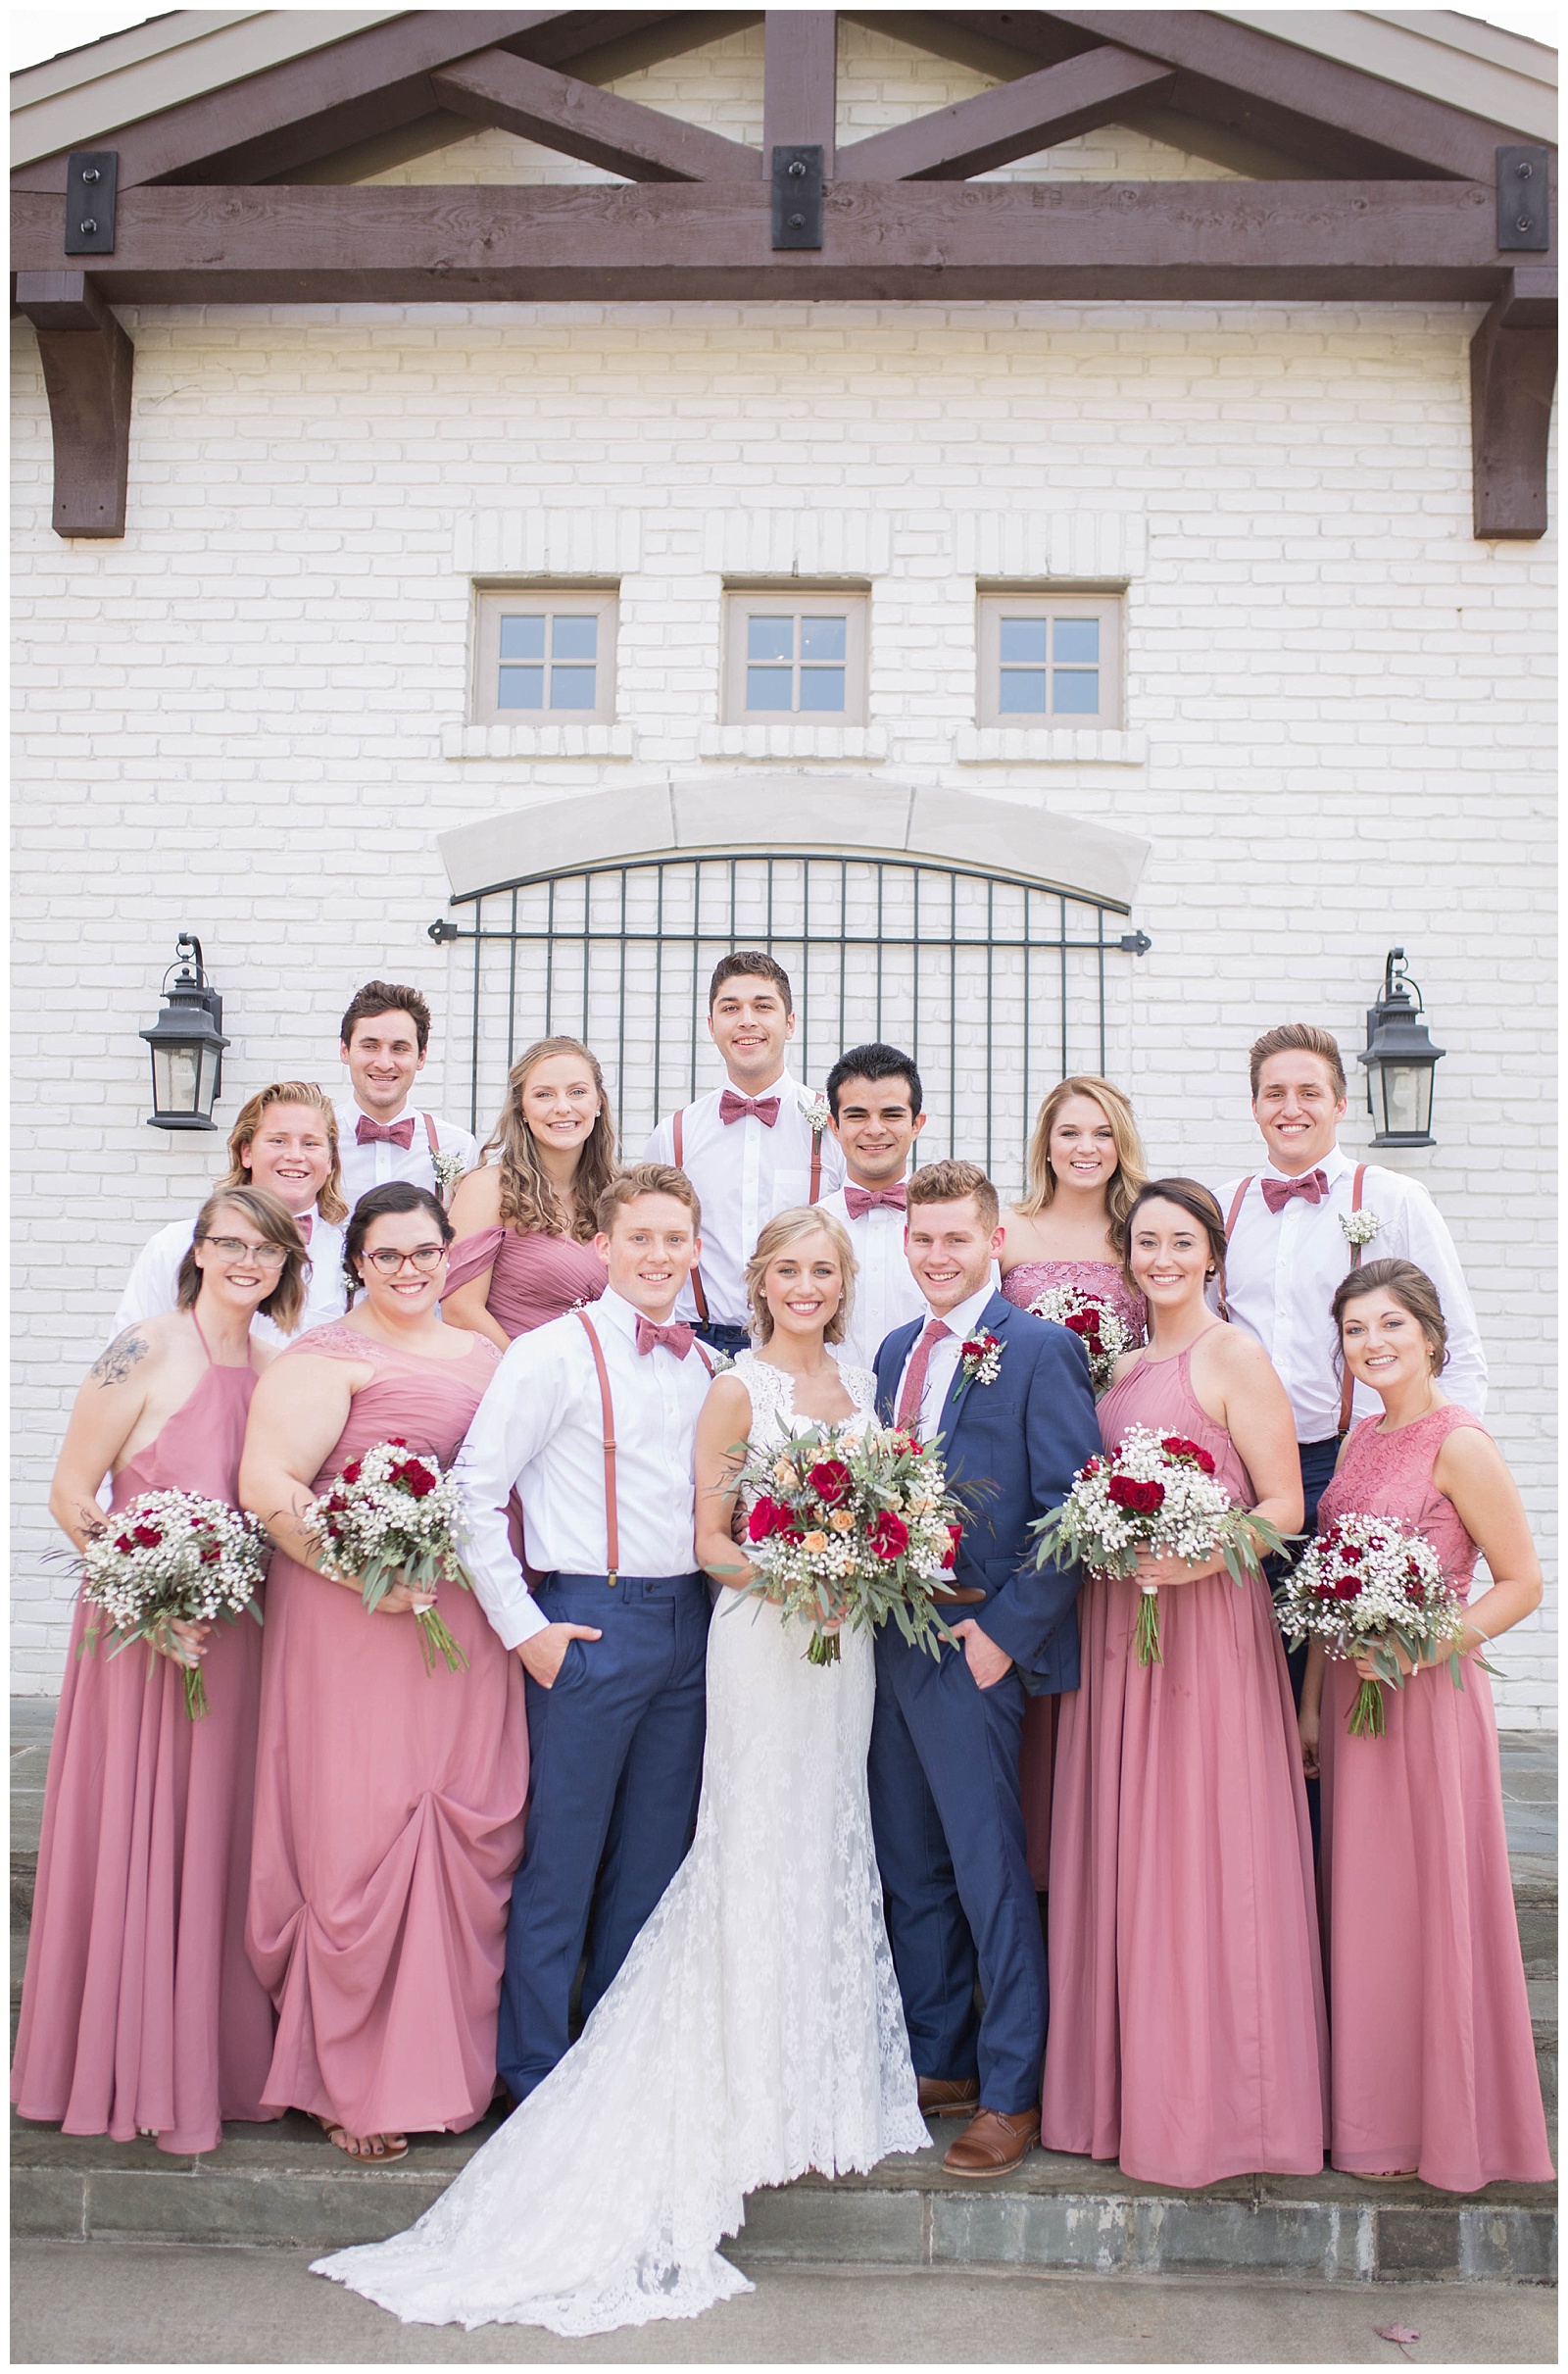 How to Choose your Wedding Party | Monica Brown Photography | monicabrownphoto.com 